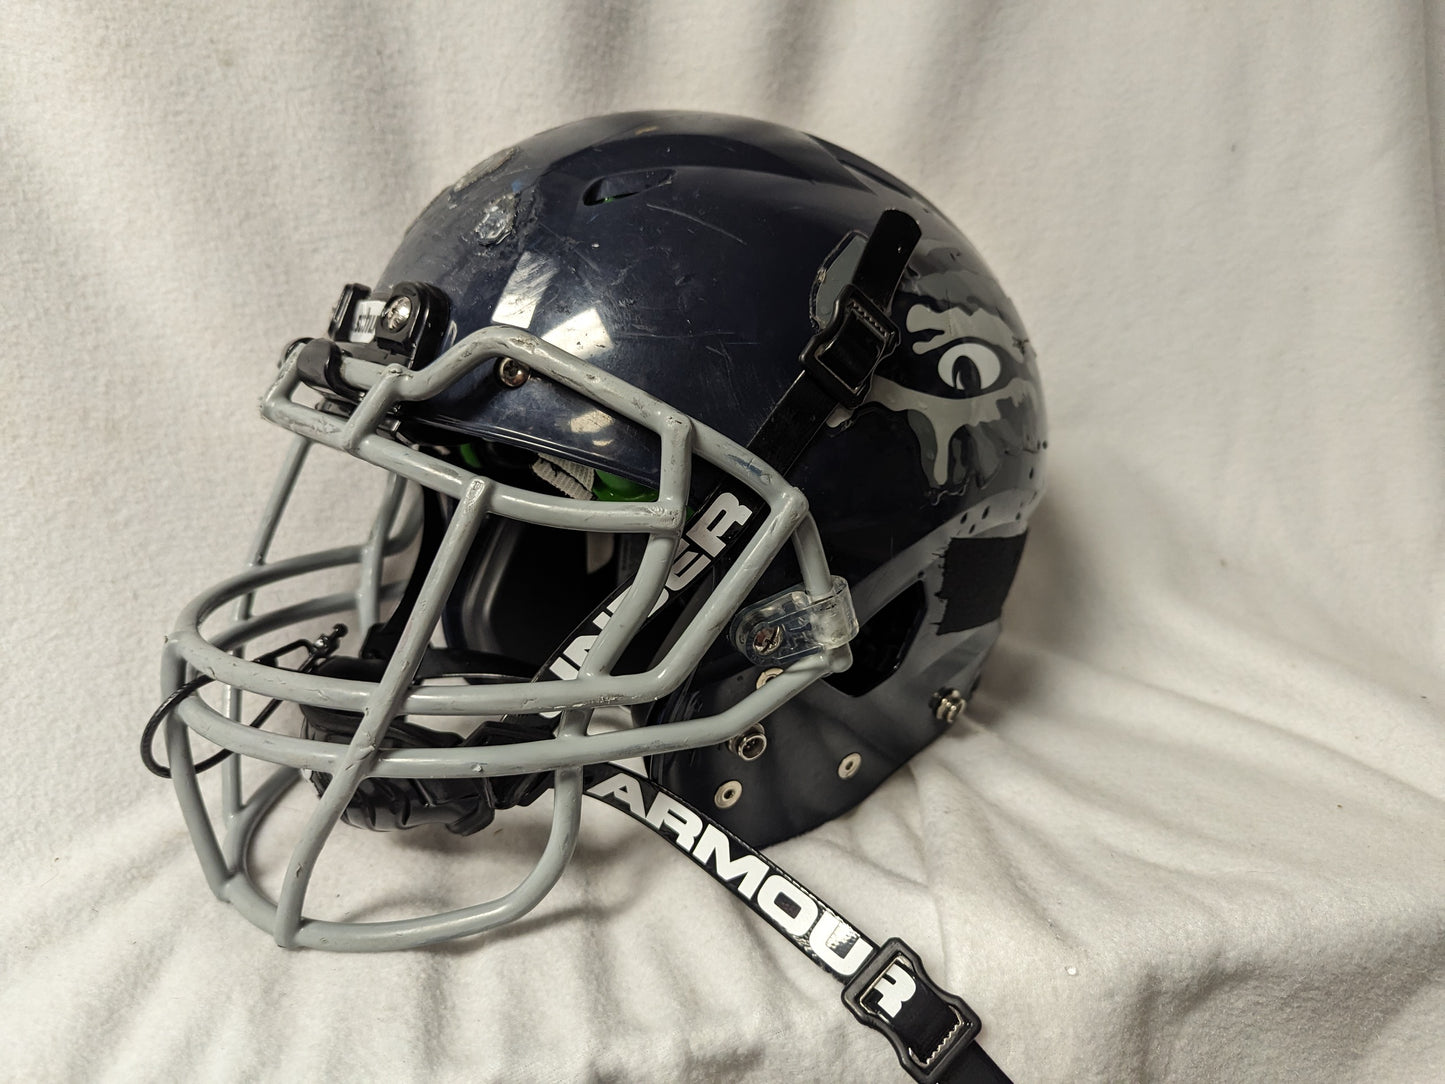 Schutt Vengeance A3 Youth NOCSAE Football Helmet Size Youth Large Color Blue Condition Used